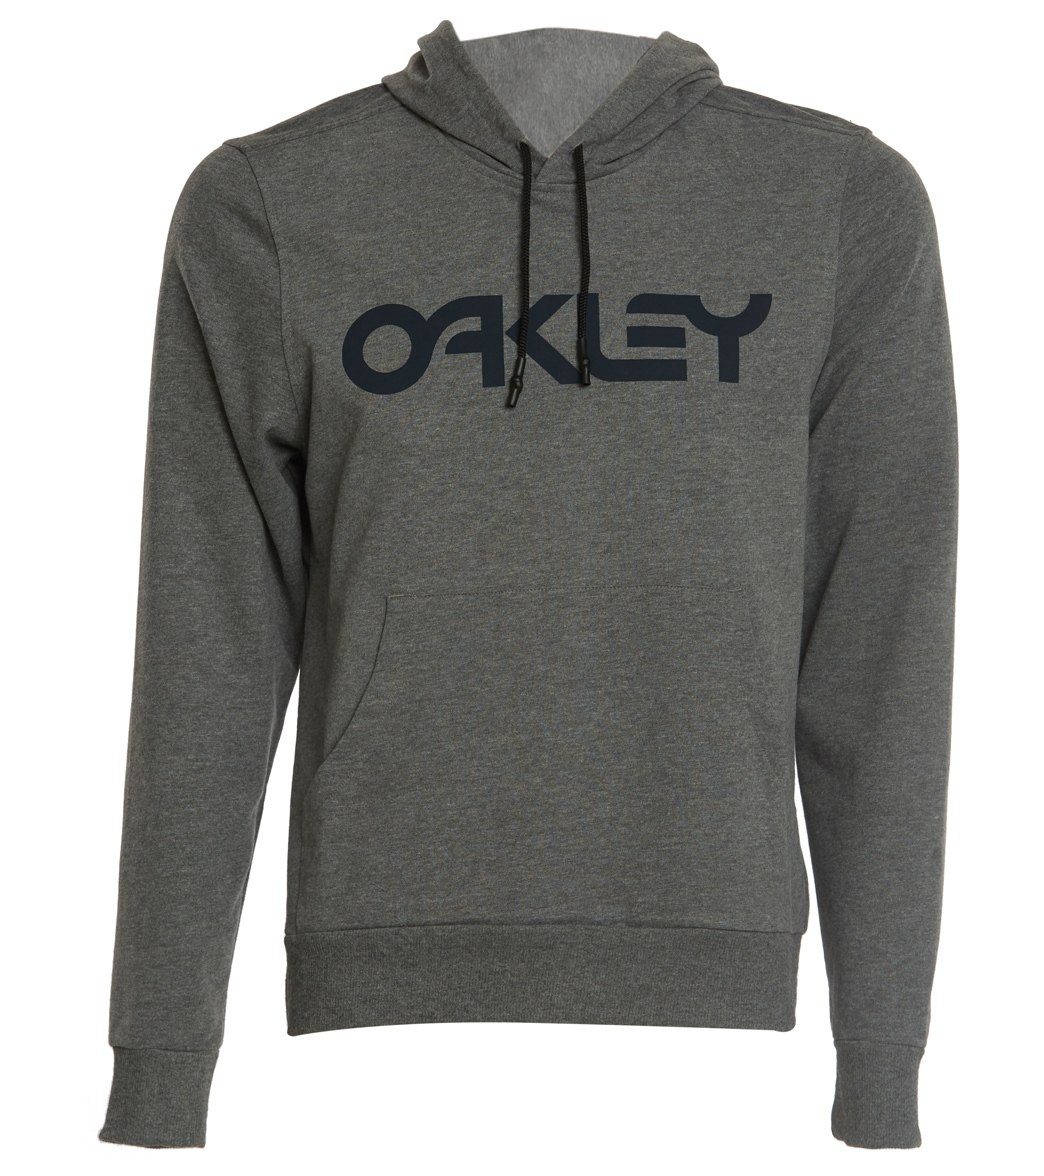 Oakley B1B Pullover Hoodie - Athletic Heather Grey Small Cotton - Swimoutlet.com